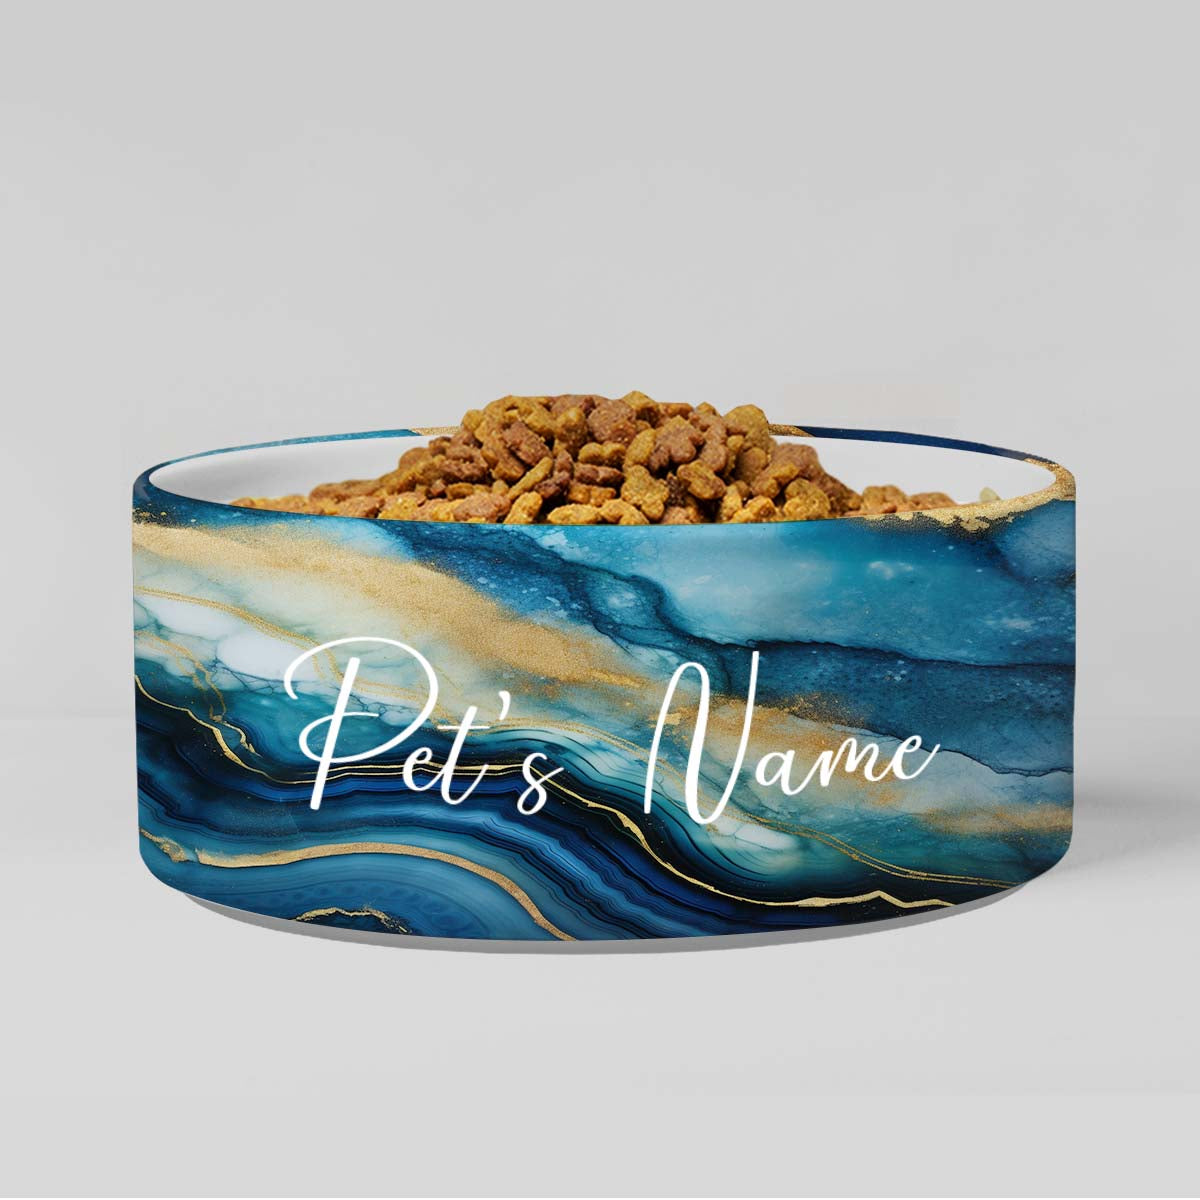 Personalized Dog Pet Cat Bowls, Agate Custom Pet Bowls for Dogs and Cats, Eclectic Modern Spotted Dishes With Name, Ceramic Custom Cute Dog Bowls, Designer Large and Small Dog Cat Pet Bowls Dish, Gift for Pet